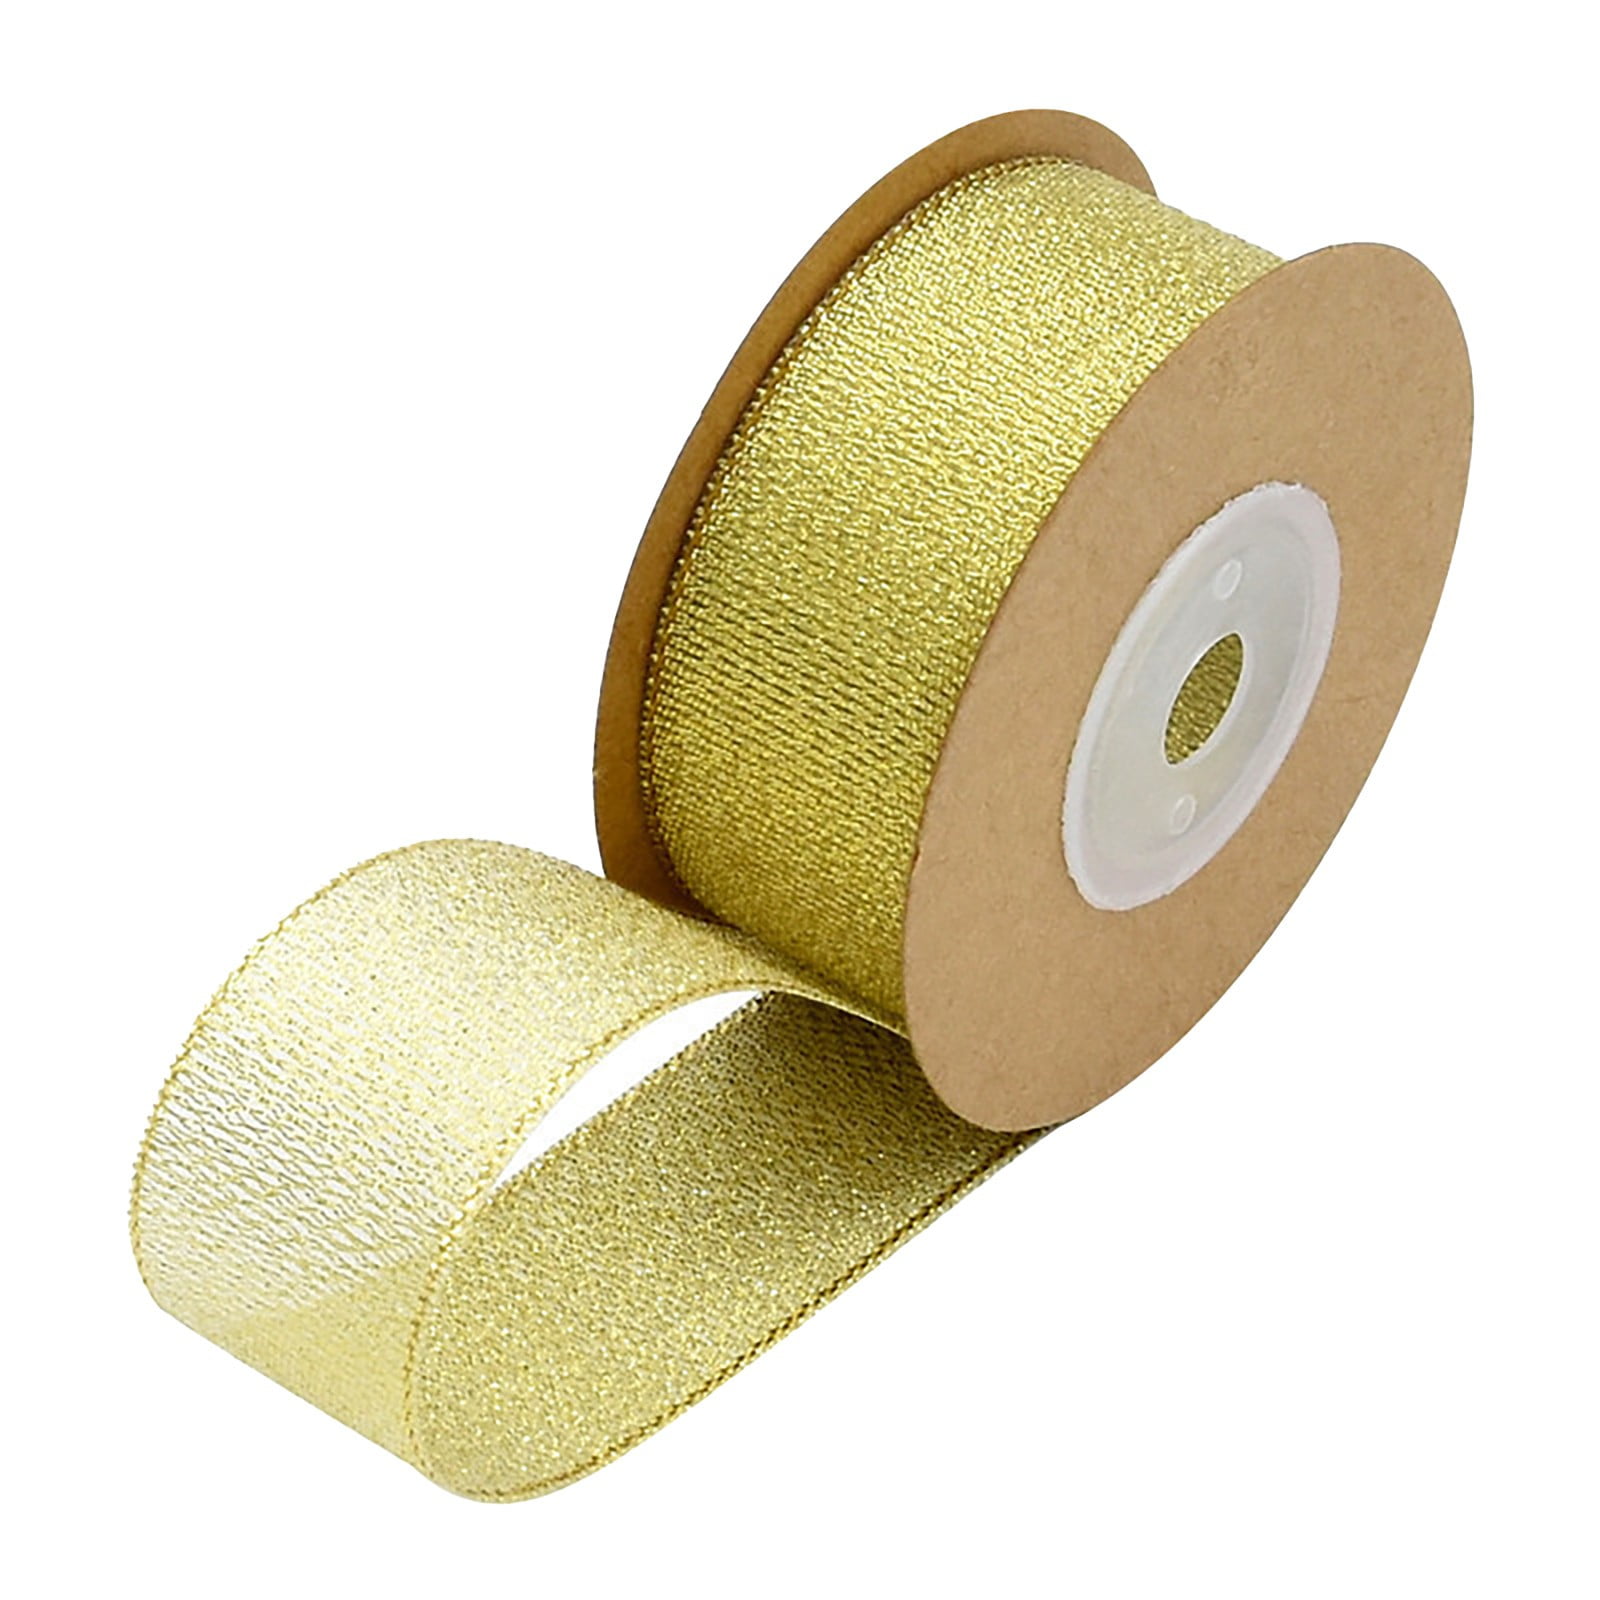 Brown Crepe Paper Party Streamer RollDecoration BannerWeddingBirthday 